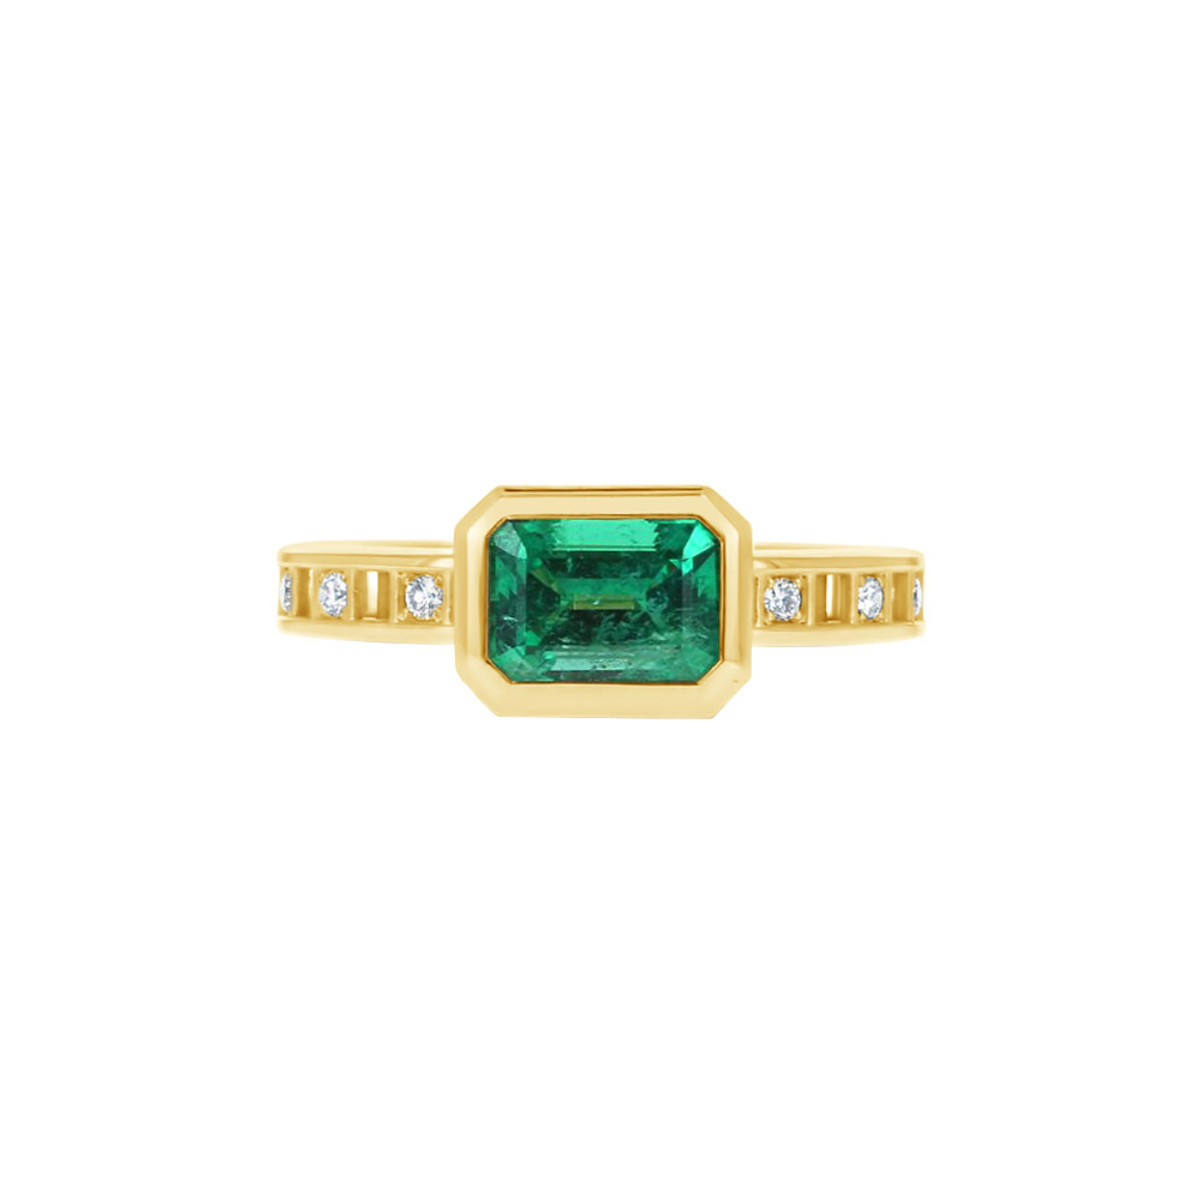 Roule & Co 18K Yellow Gold Diamond & Emerald Center Ring-DCSTE0110 Product Image